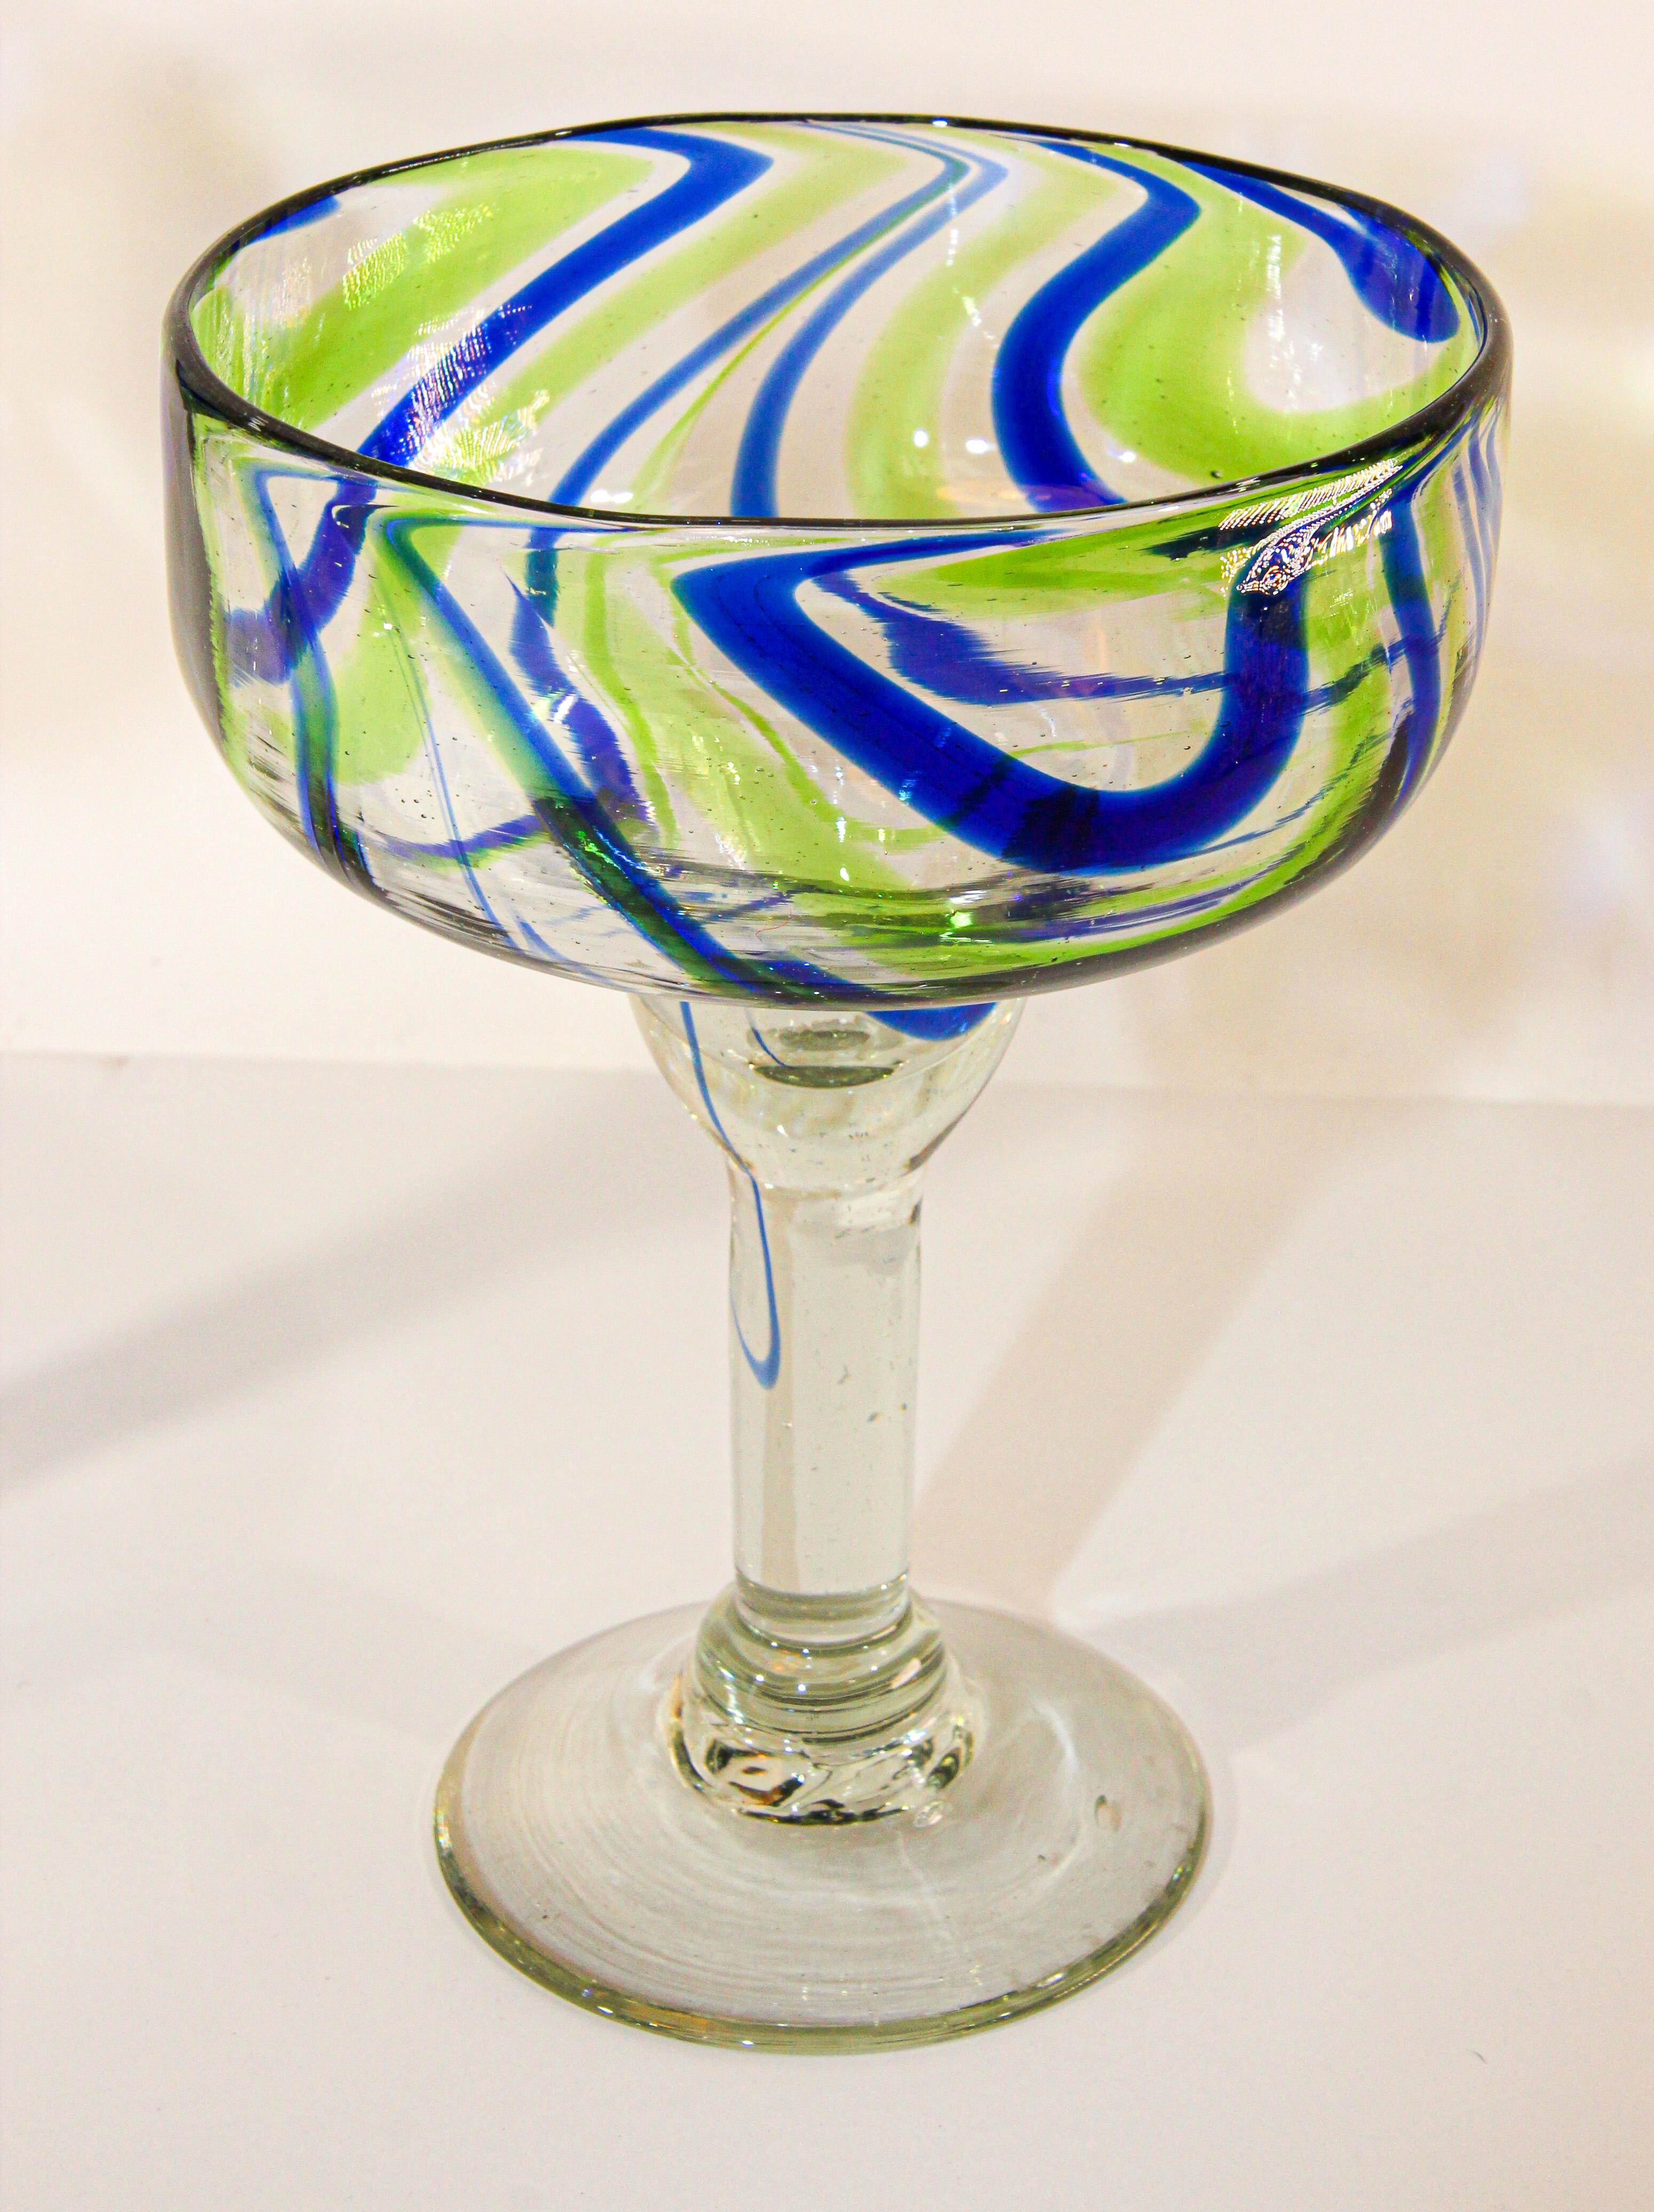 Vintage Murano Blue and Green Martini Glasses Set of 2 7